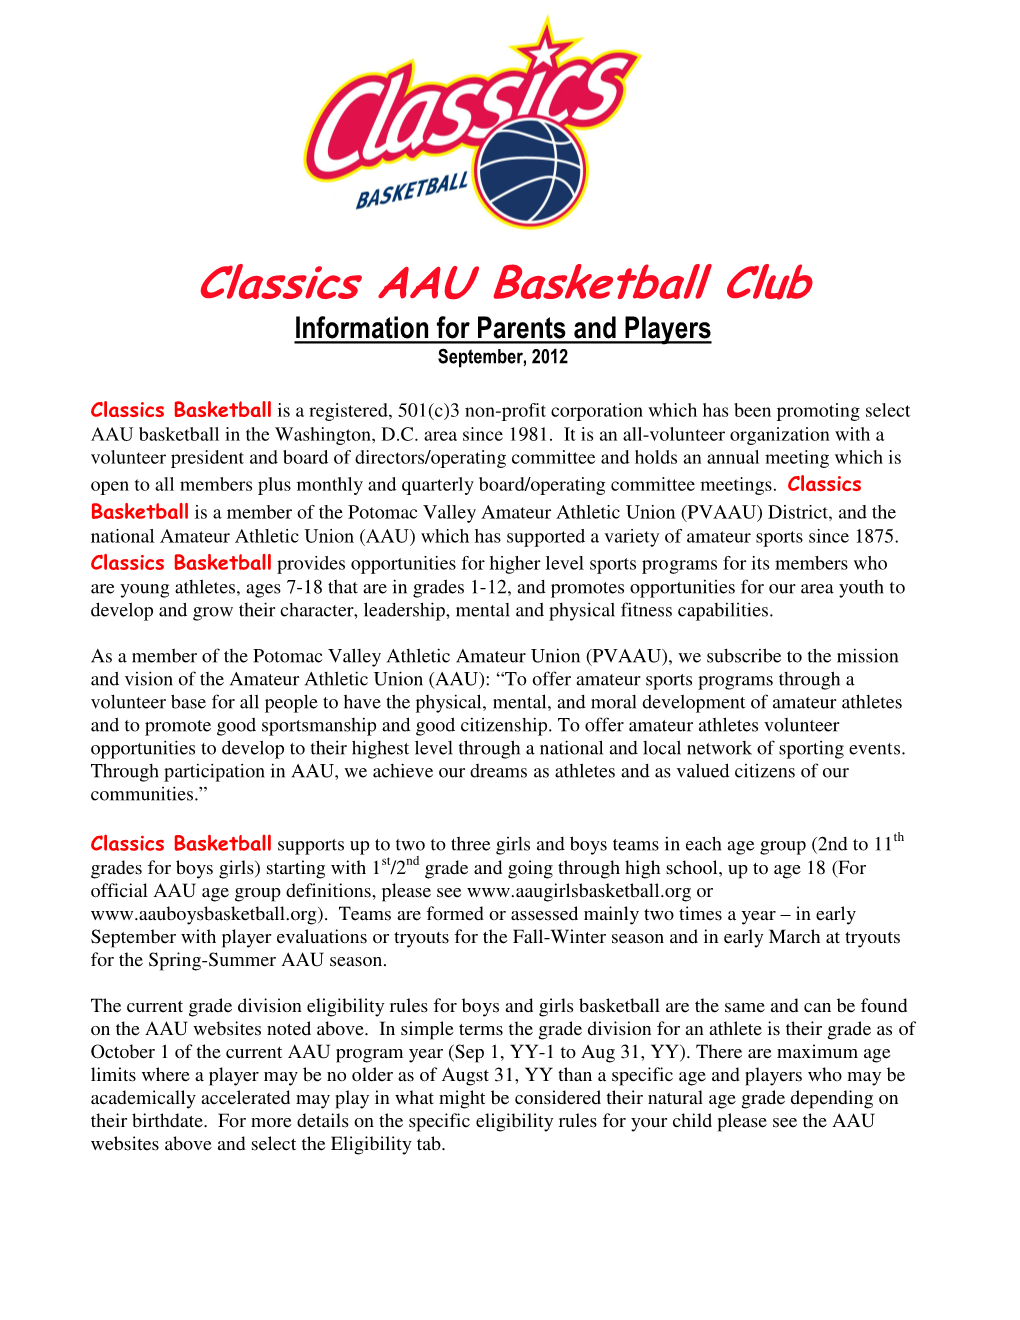 Classics AAU Basketball Club Information for Parents and Players September, 2012